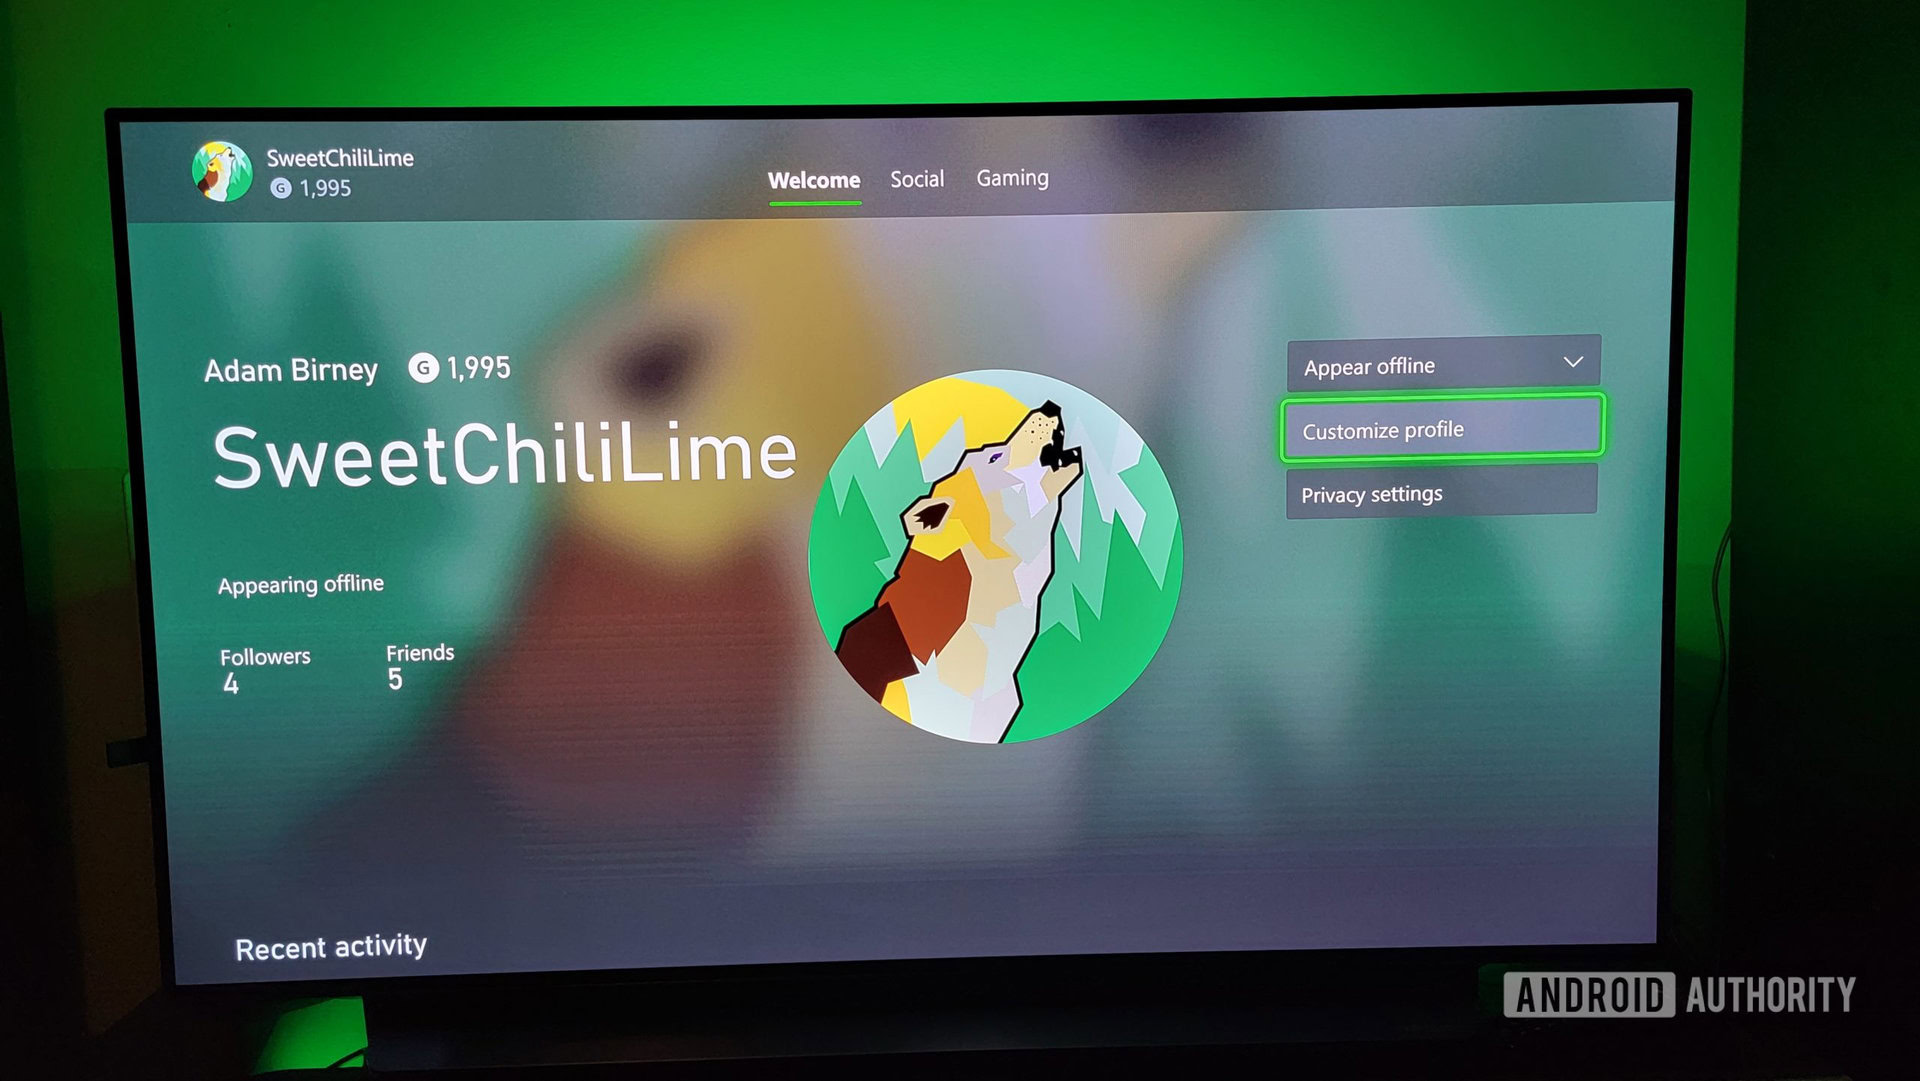 How to change your Xbox Gamertag - Android Authority